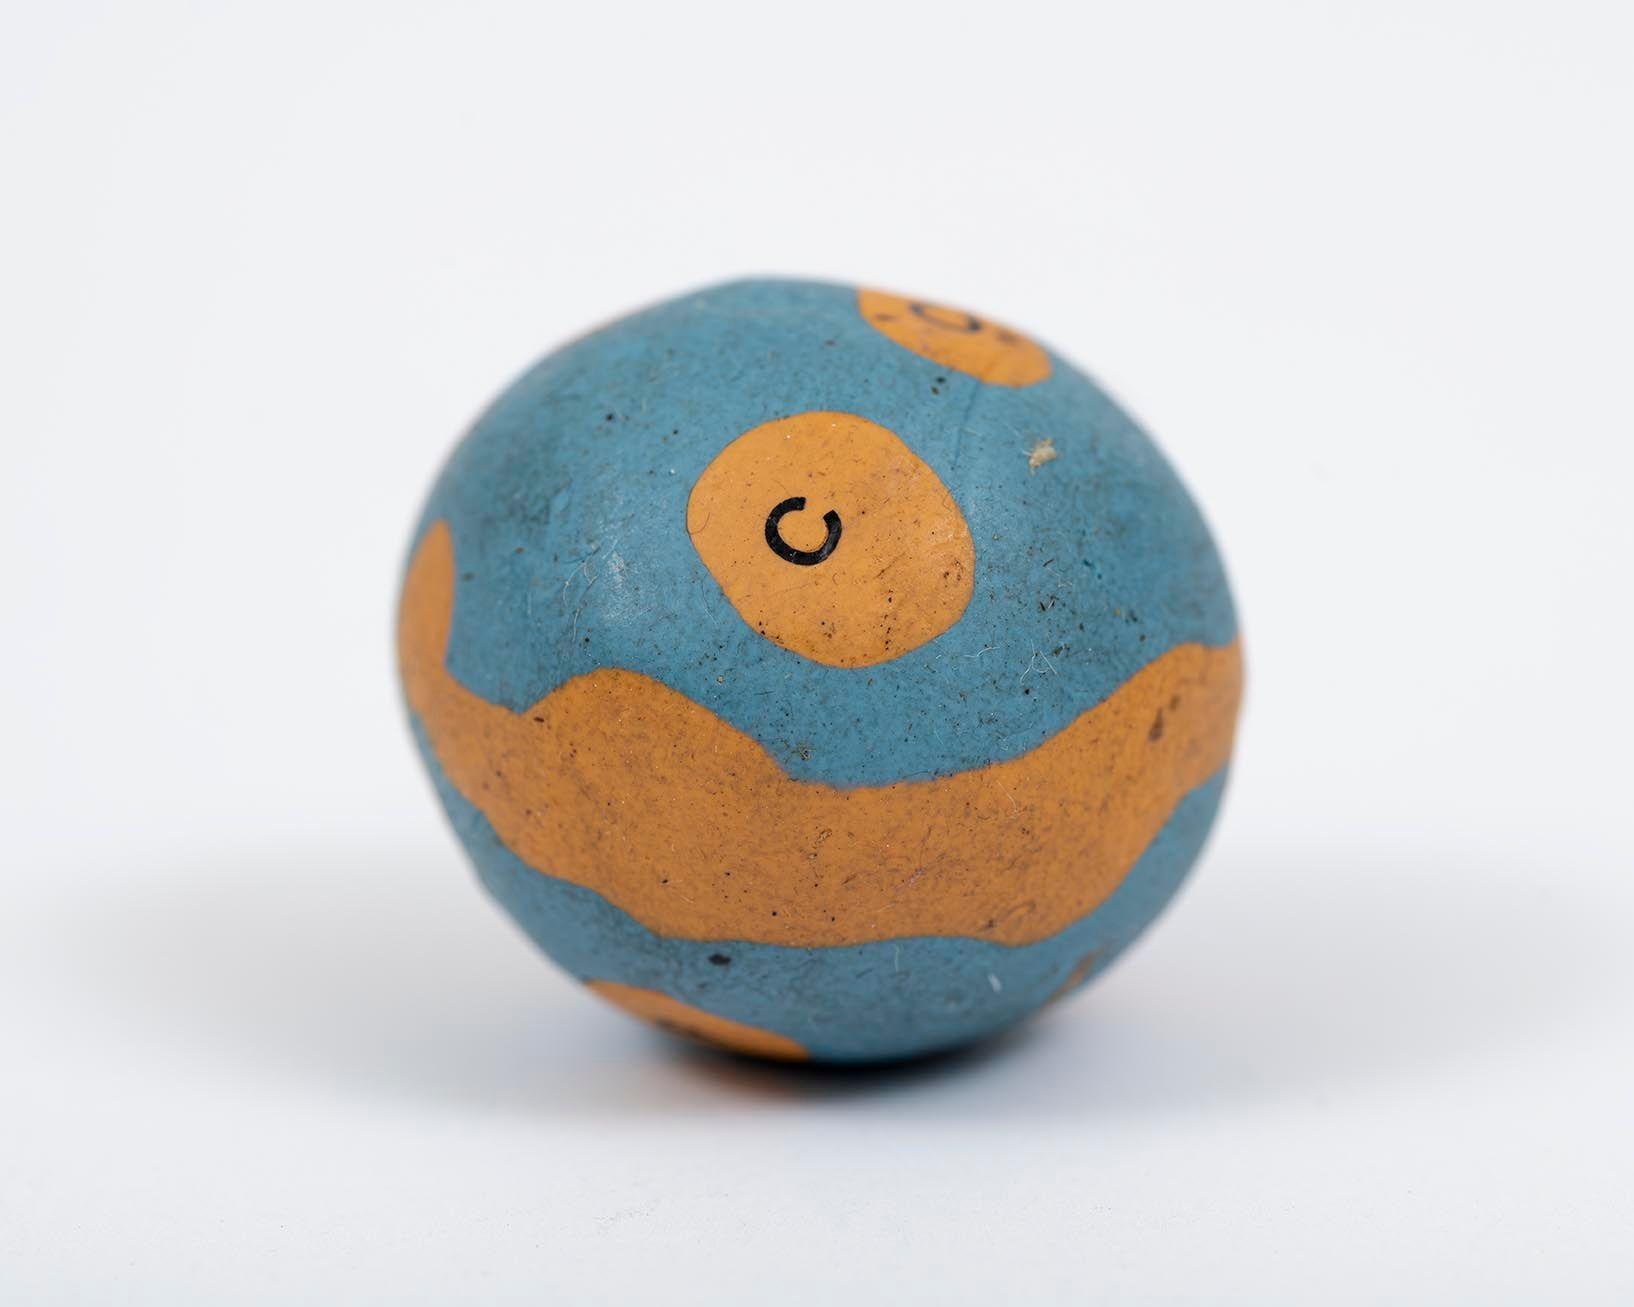 Model (blue and orange plasticine), from Working Table objects